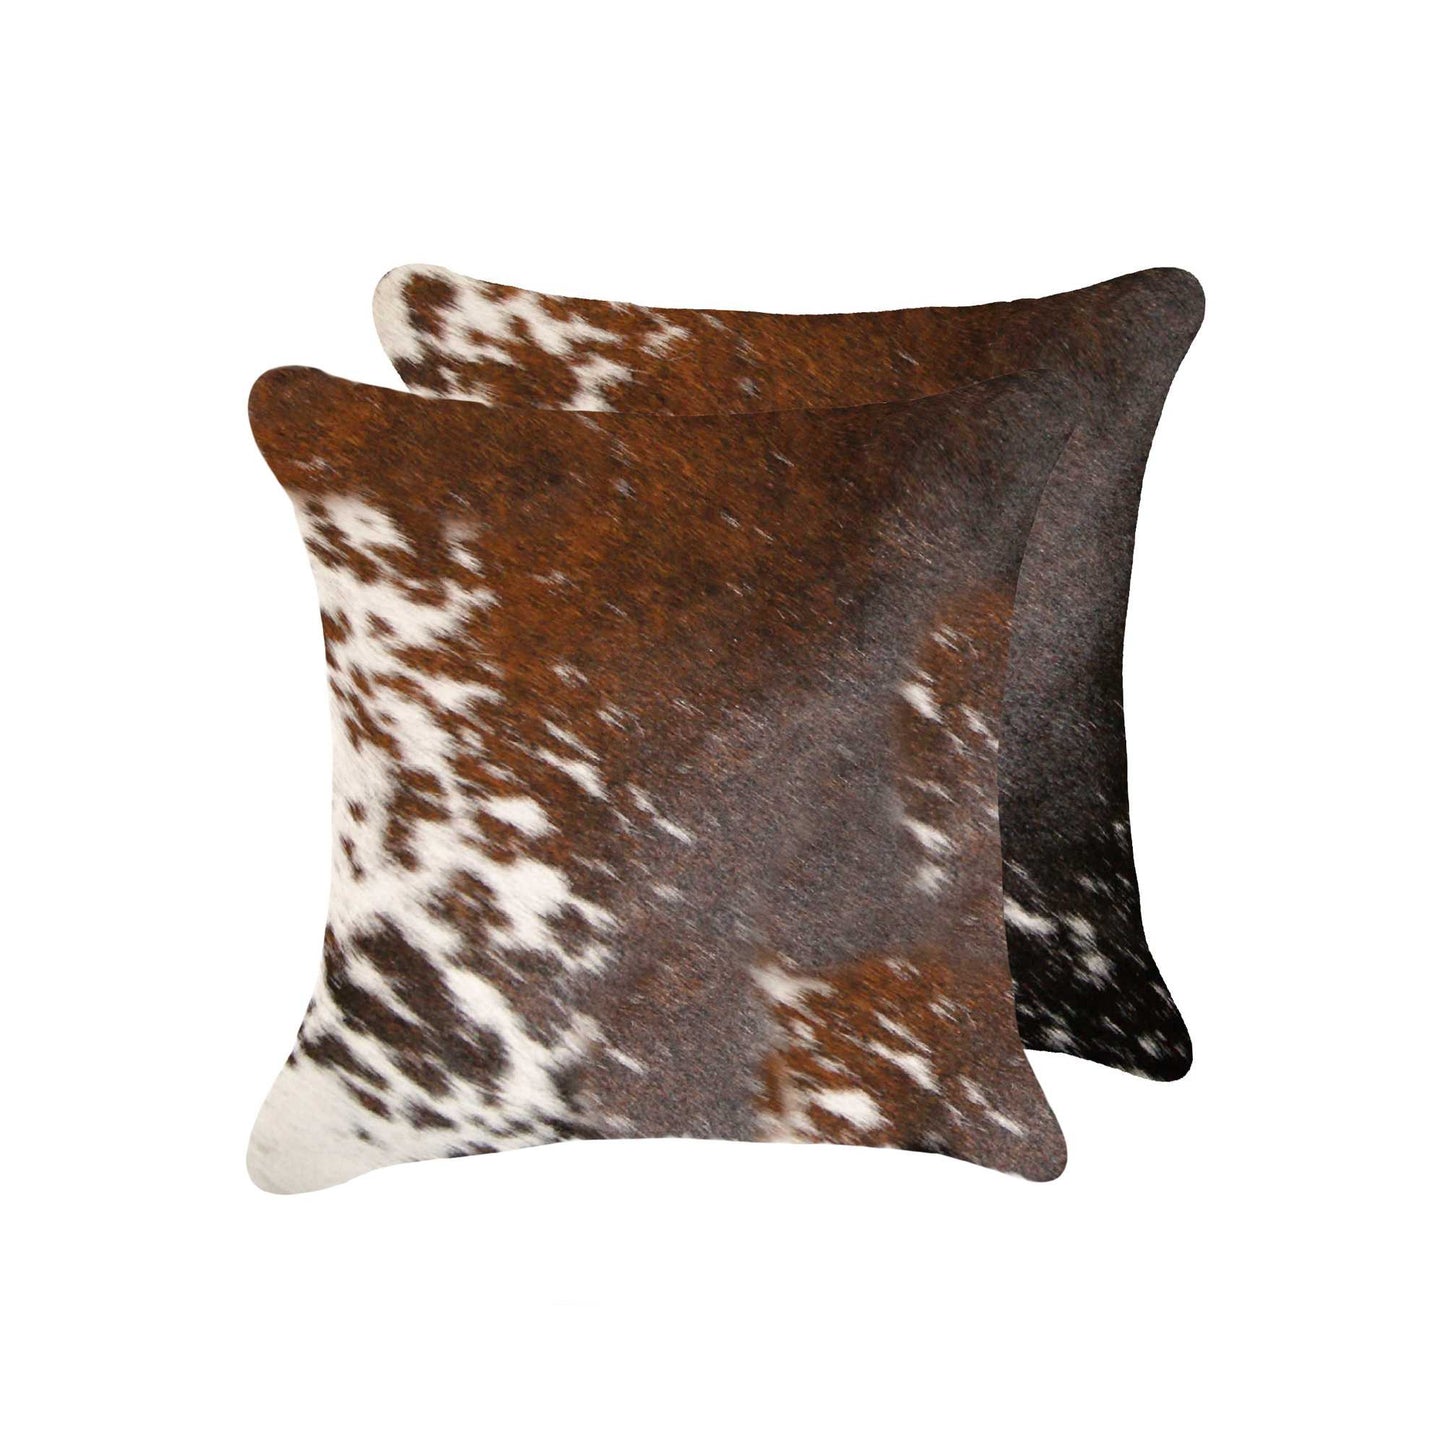 Set of Two 18" Brown and White Cowhide Throw Pillow